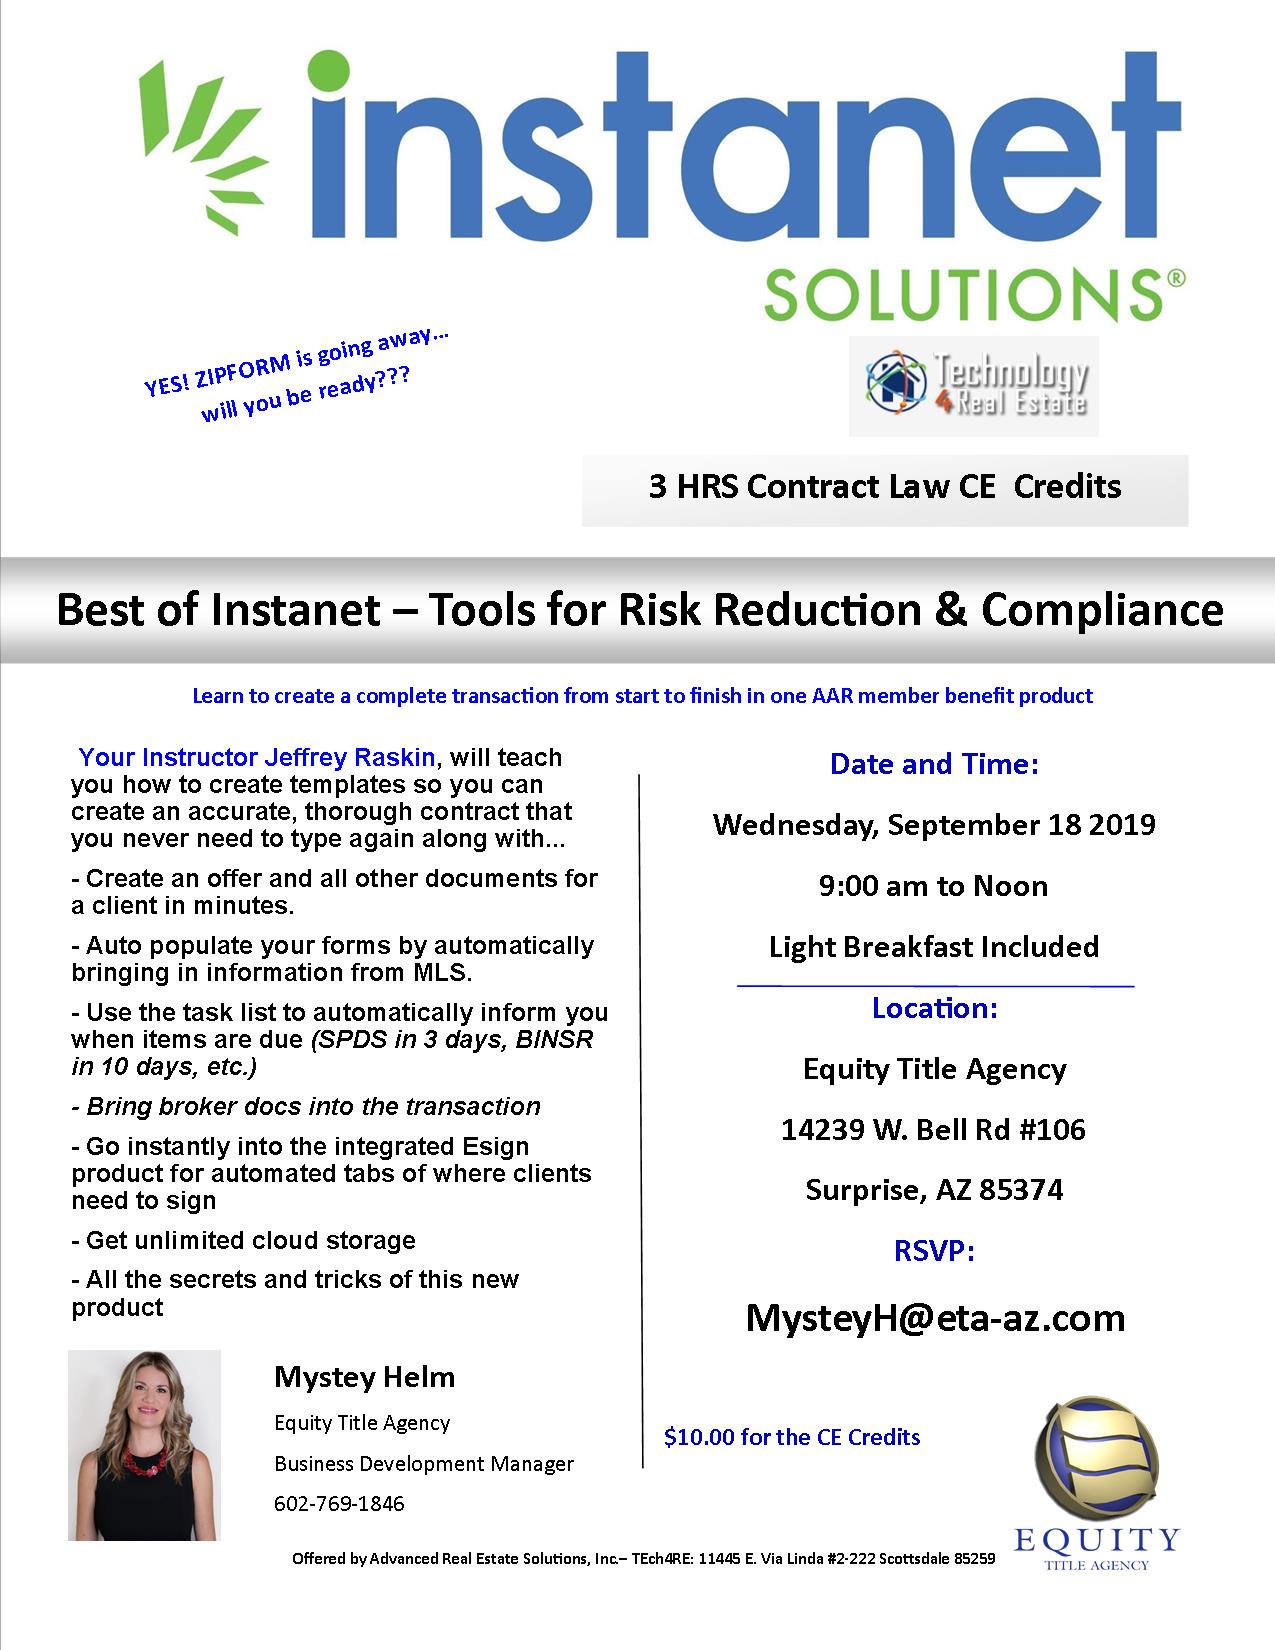 Best of Instanet Solutions